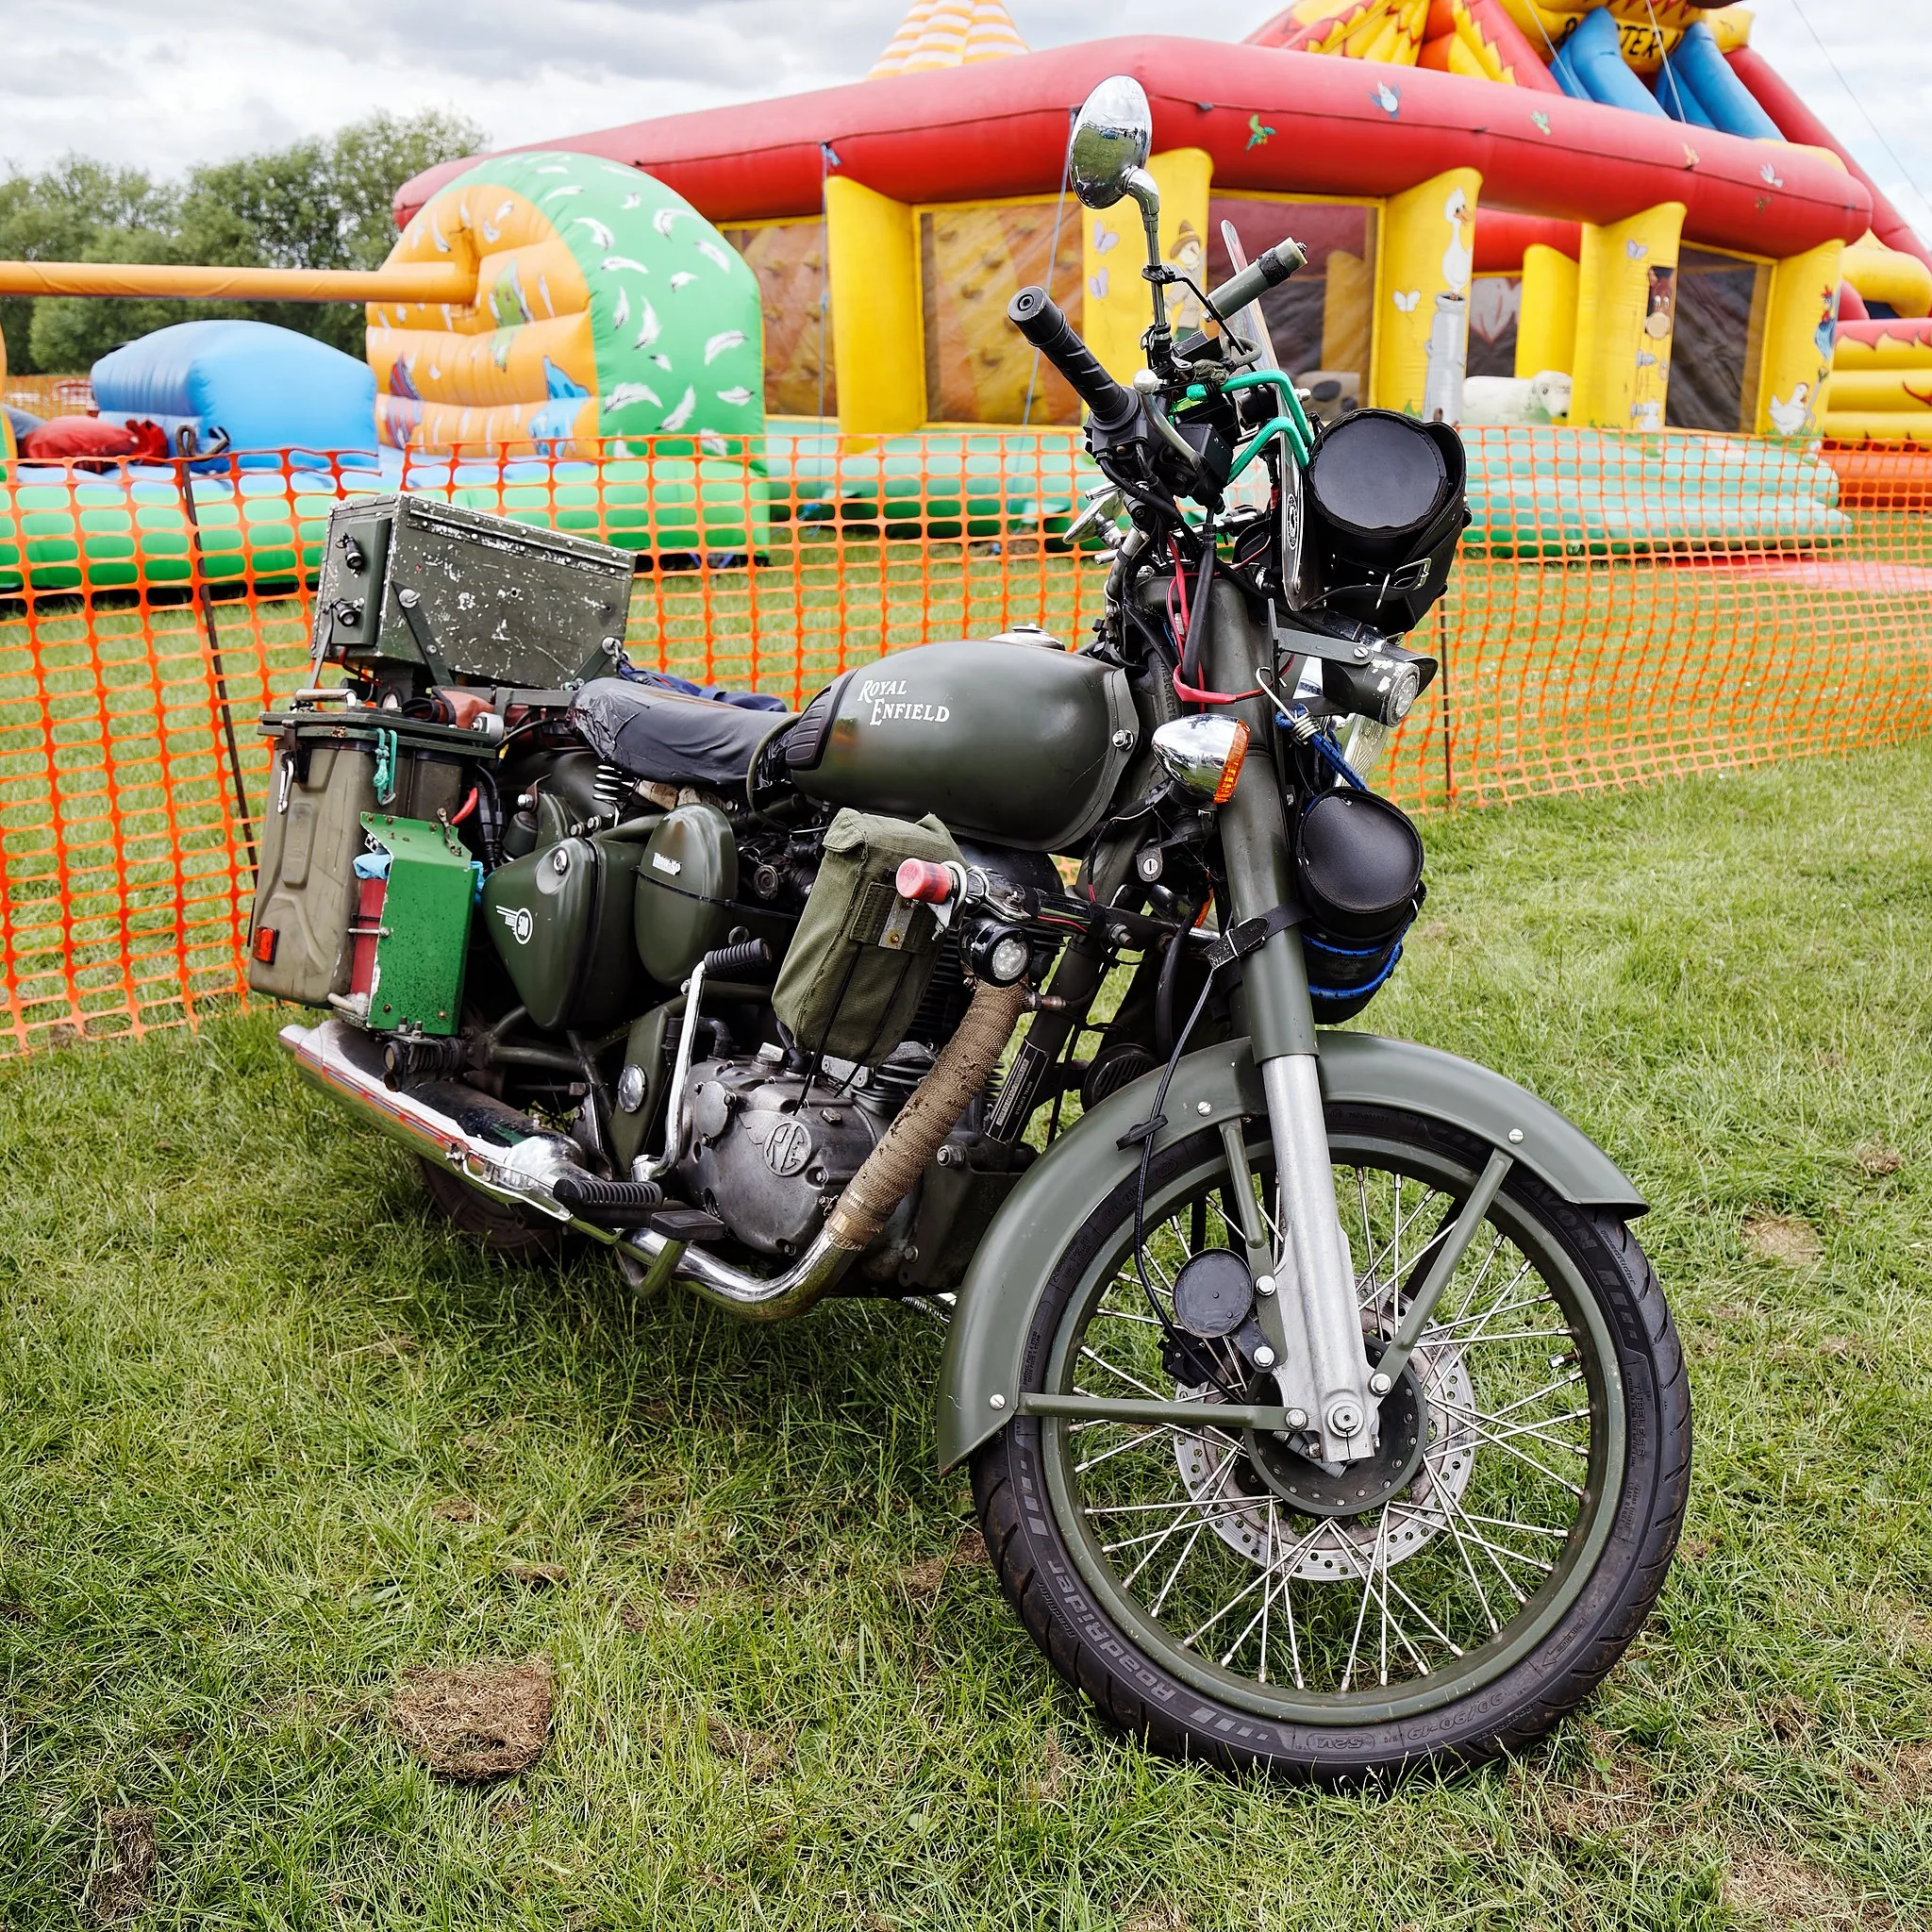 Photo showing: Royal Enfield motorcycle at Abridge Village Weekend 2022 in Abridge, Essex, England. Mobile device view (2022): Wikimedia makes it difficult to immediately view photo groups related to this image. To see its most relevant allied photos, click on Abridge, and this uploader's photos. You can add a beta click-through 'categories' button to the very bottom of photo-pages you view by going to settings... three-bar icon top left. Desktop view (2022): Wikimedia makes it difficult to immediately view the helpful category links where you can find images related to this one in a variety of ways; for these go to the very bottom of the page. Camera: Canon EOS 6D Mark II with Canon EF 24-105mm F4L IS USM lens. Software: RAW file lens-corrected, optimized and converted with DxO PhotoLab 4 Elite, and further optimized with Adobe Photoshop CS2.